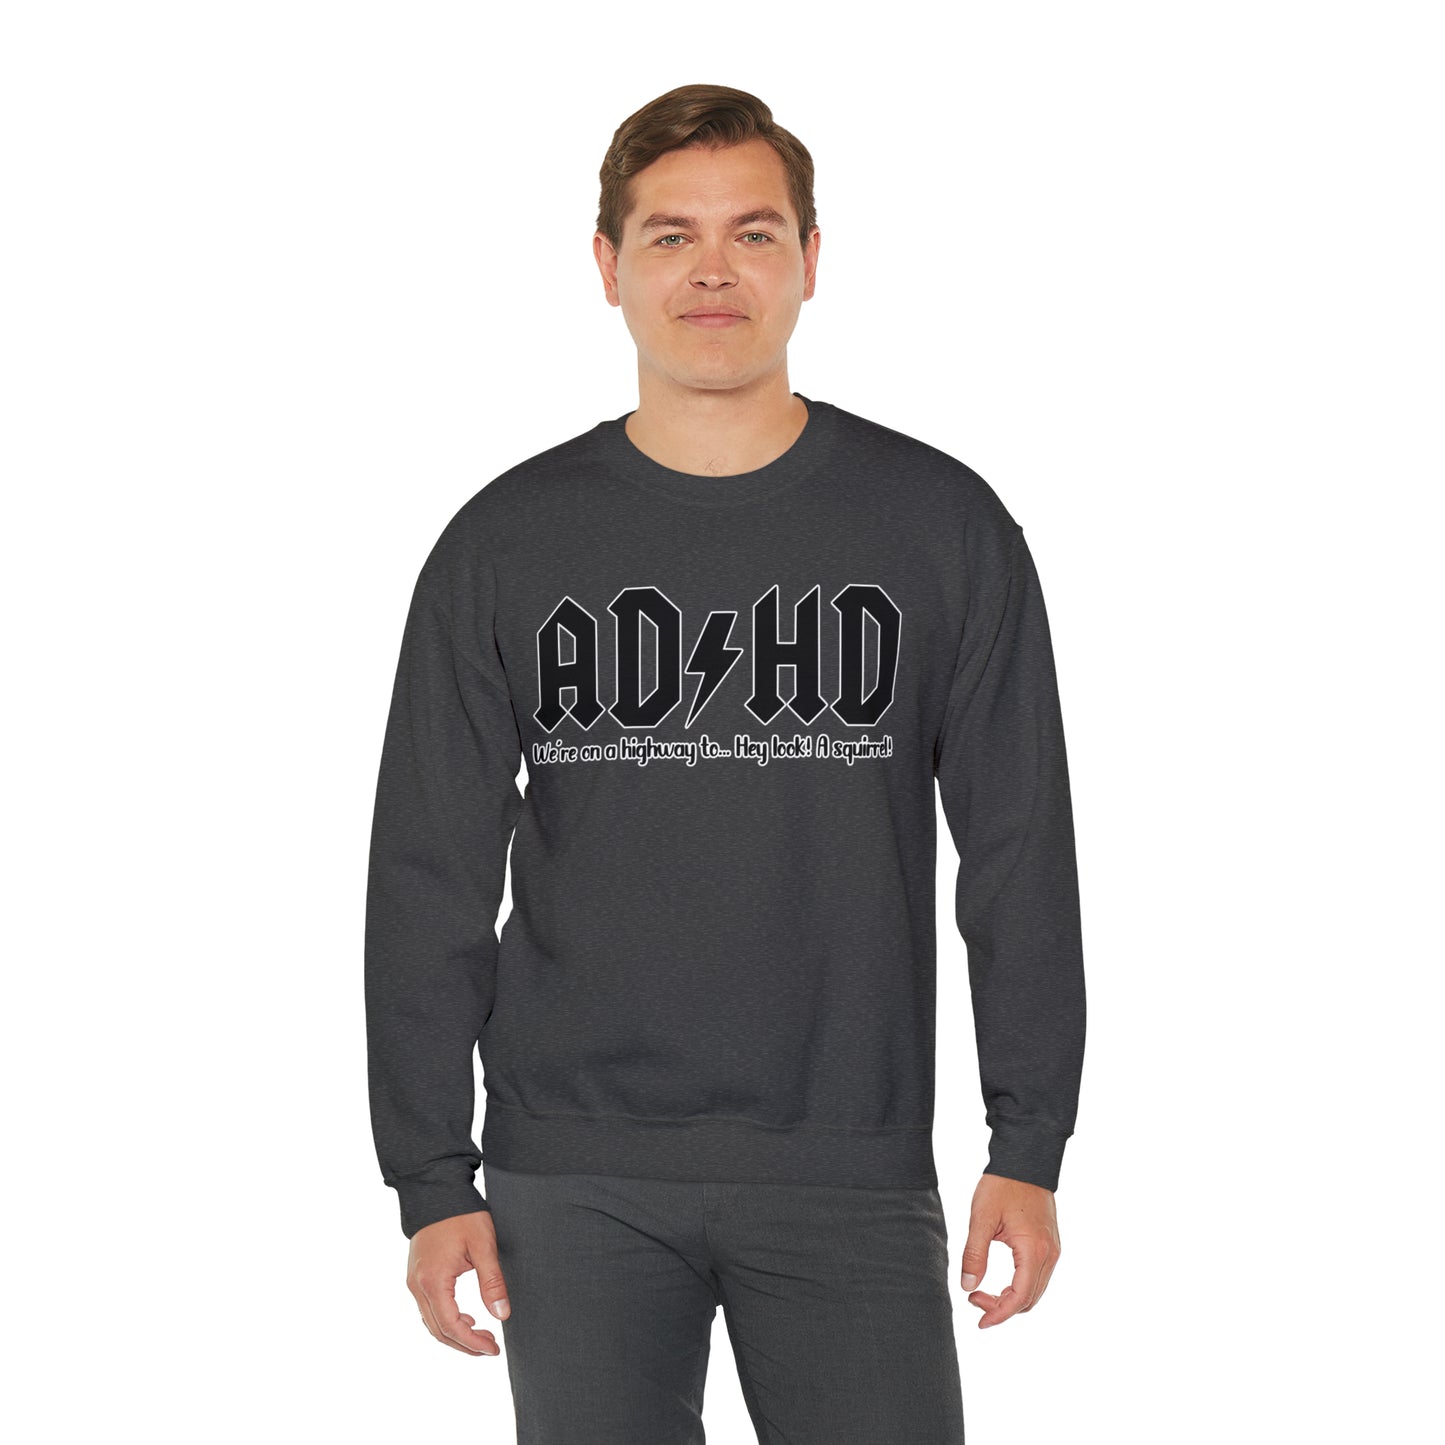 AD HD We're on a Highway to ... Hey Look! A Squirrel: Unisex Heavy Blend™ Crewneck Sweatshirt